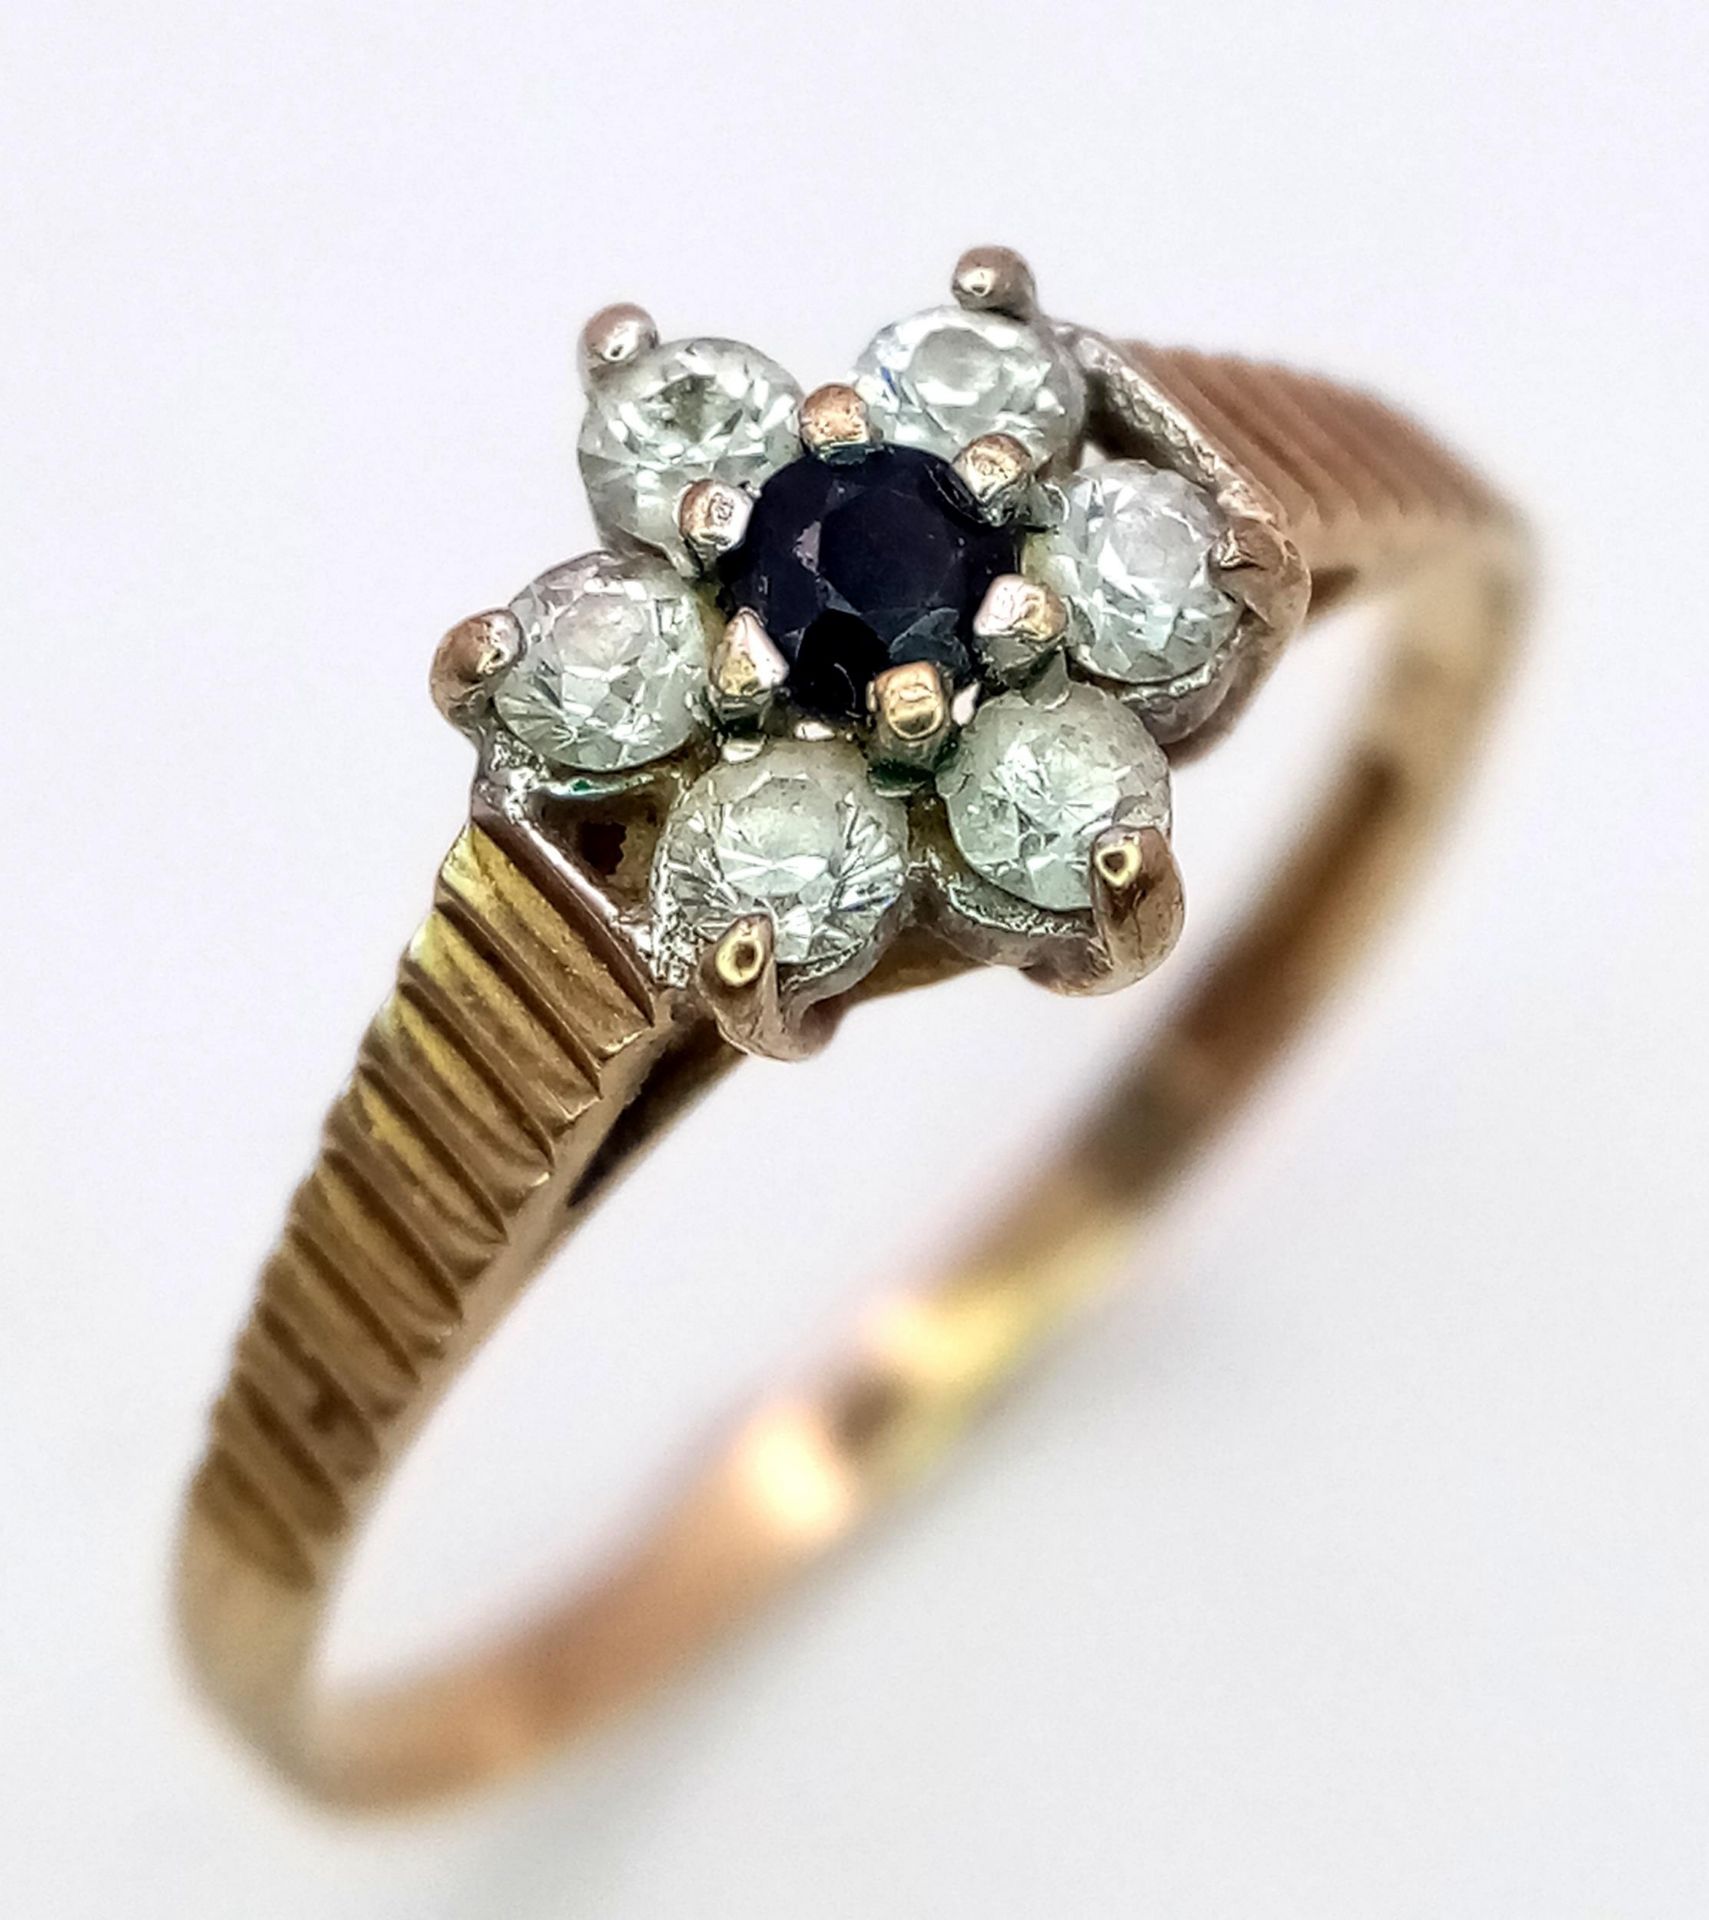 A Vintage 9K Yellow Gold Sapphire and White Zircon Ring. Size L. 1.2g total weight.